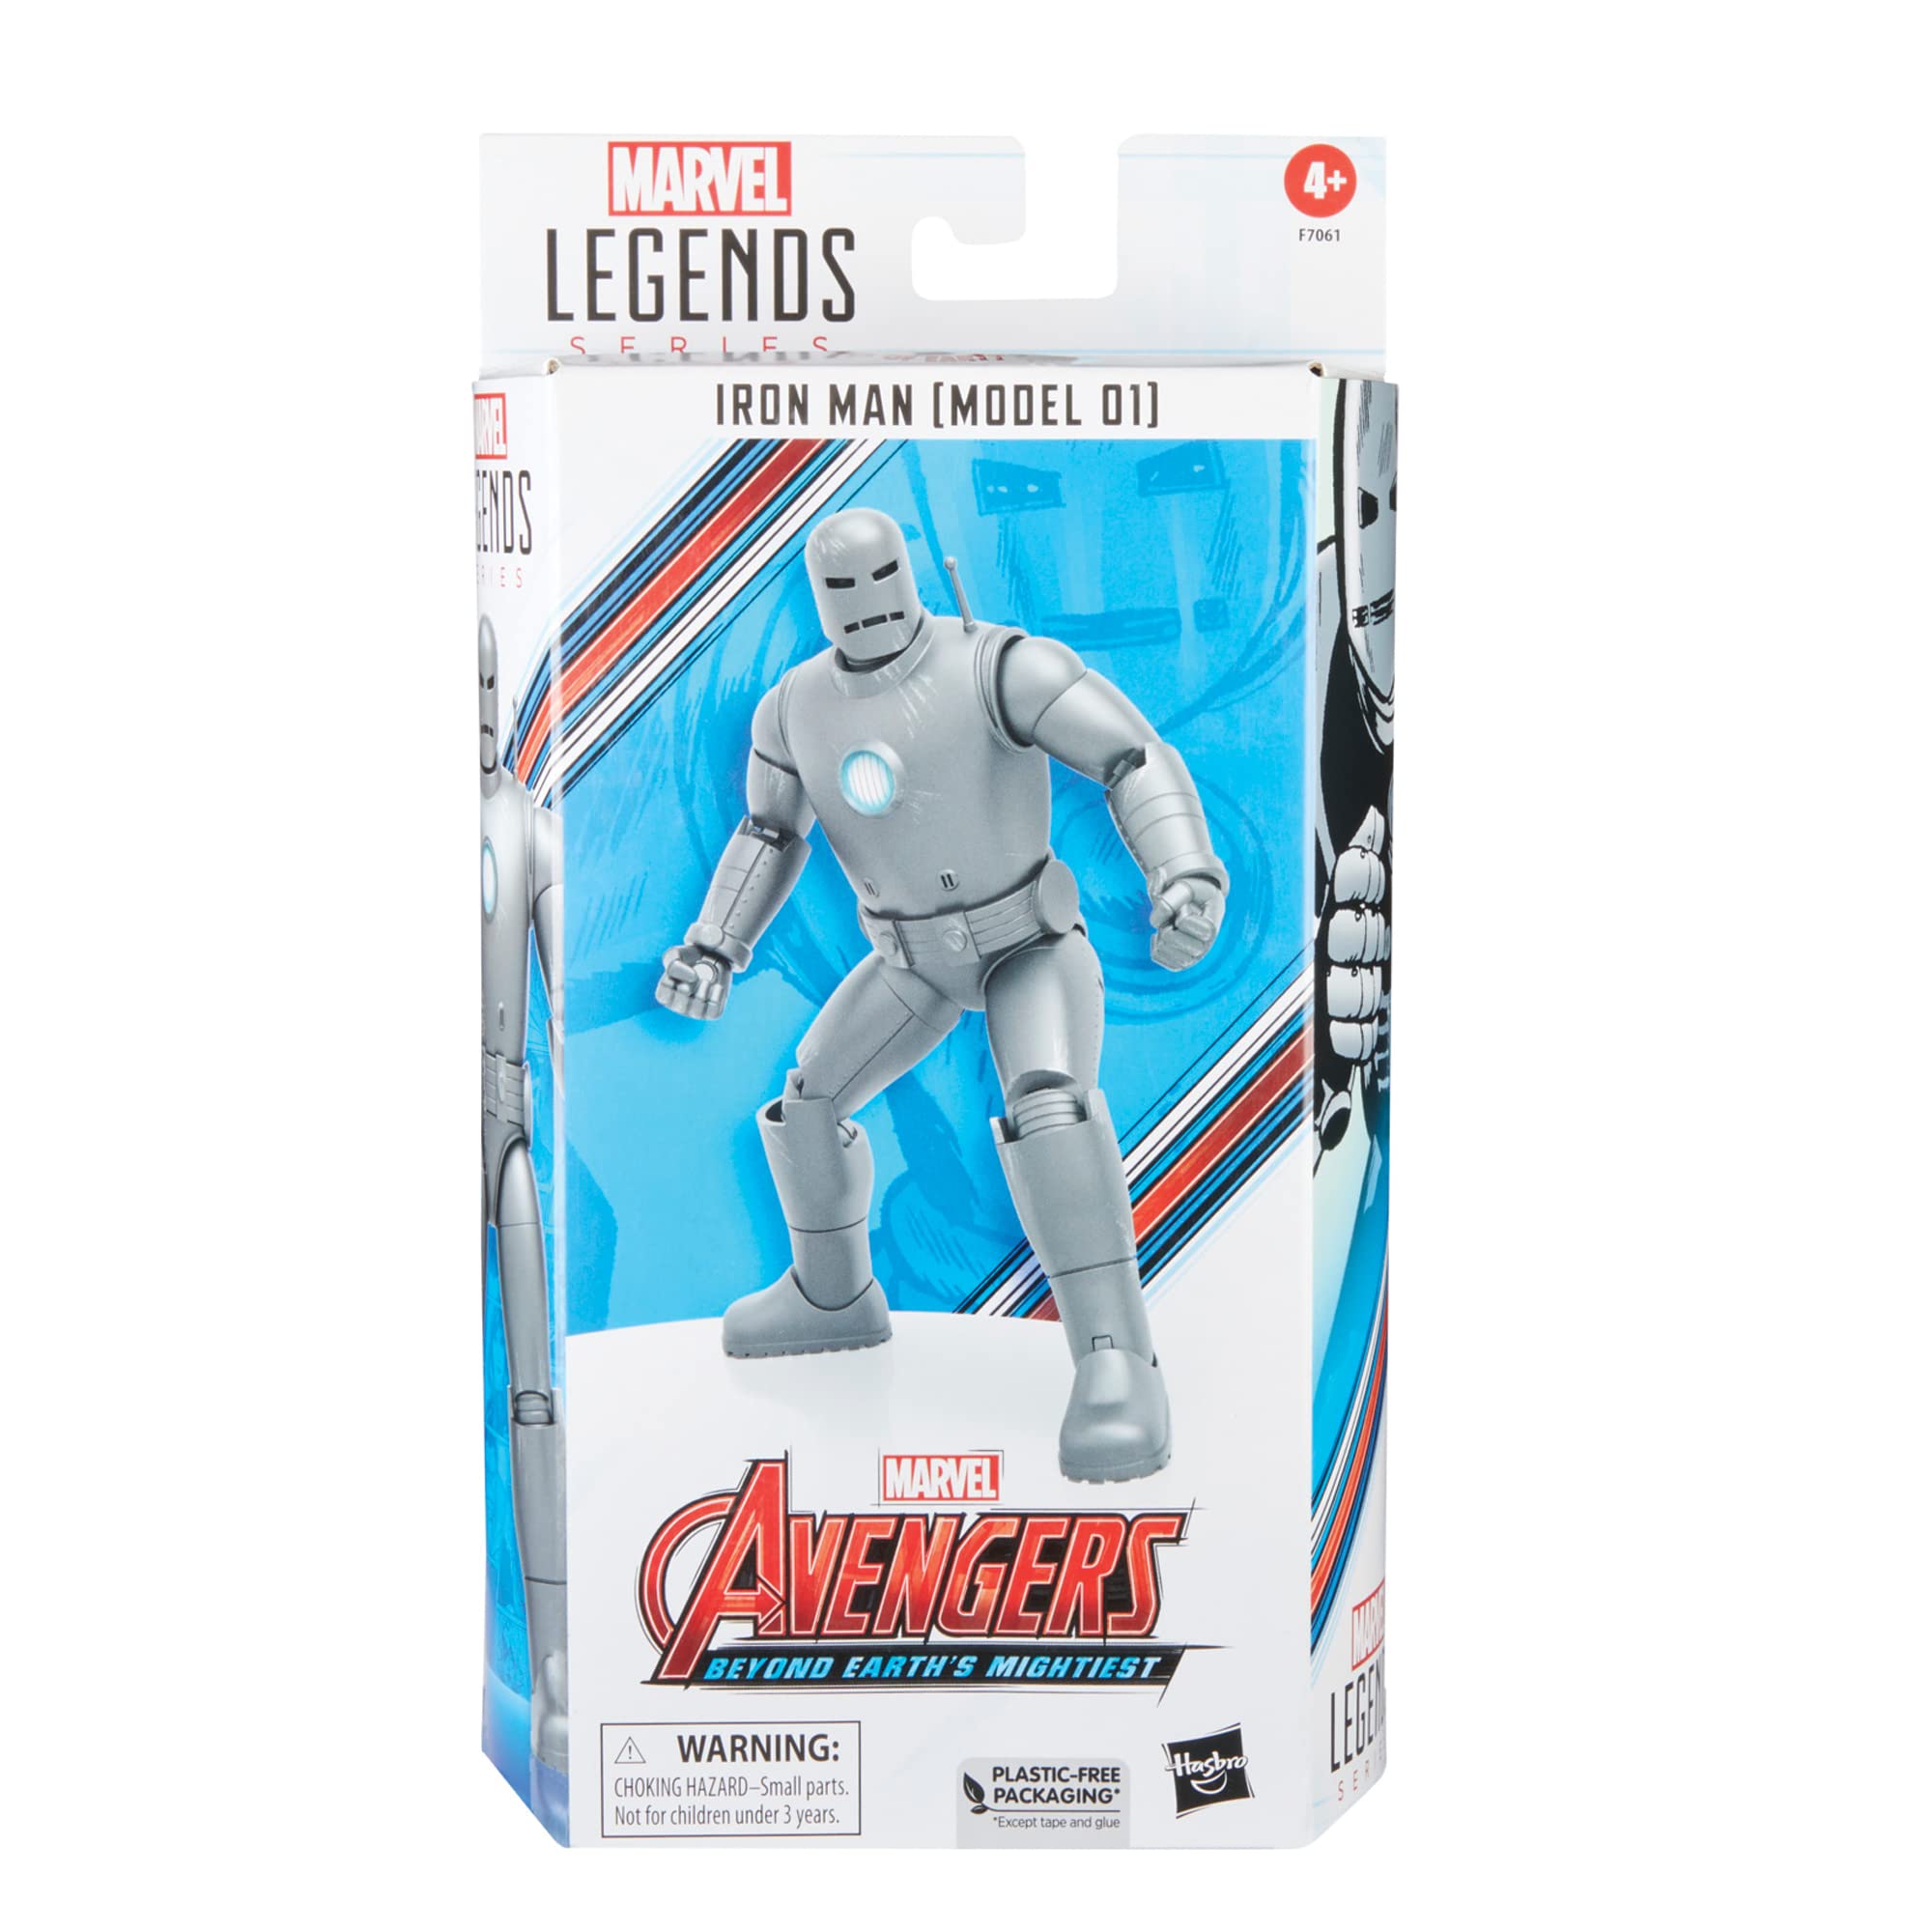 Marvel Hasbro Legends Series Iron Man (Model 01) Avengers 60th Anniversary Collectible 6 Inch Action Figure,6 Accessories